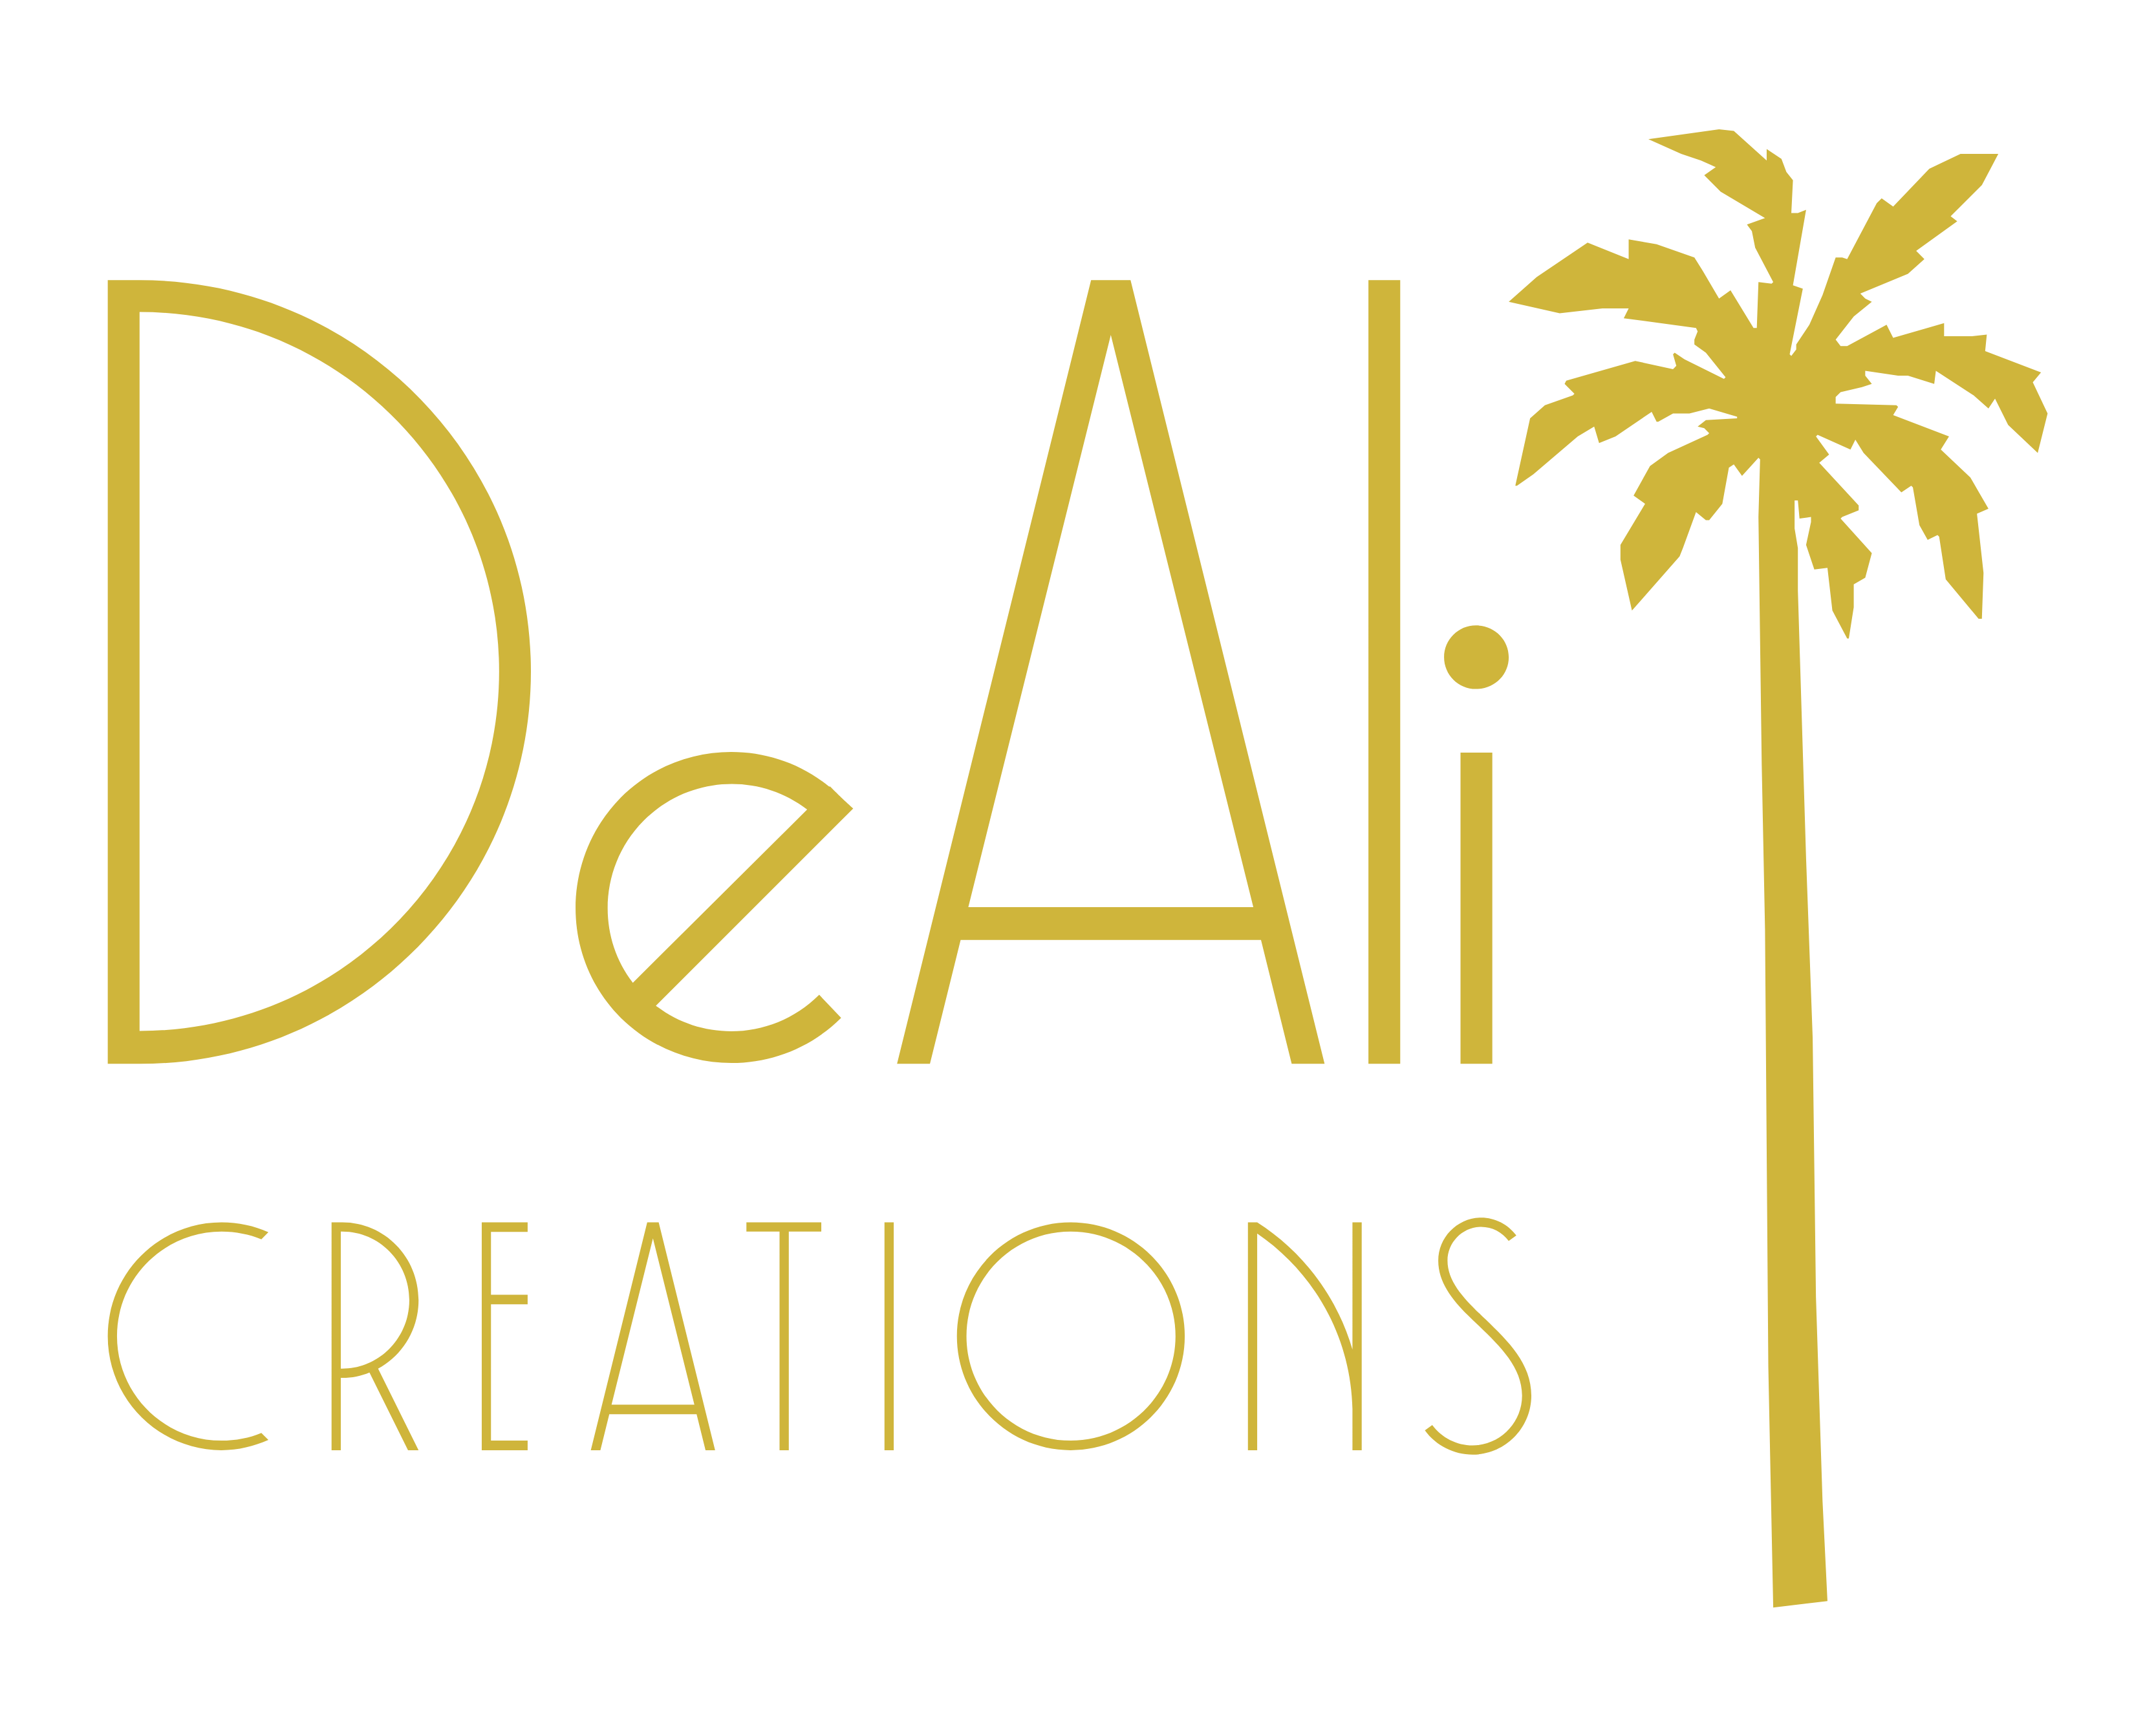 DeAli Creations - Hand made jewelry, gifts, and accessories #dealicreations - DeAli Creations™